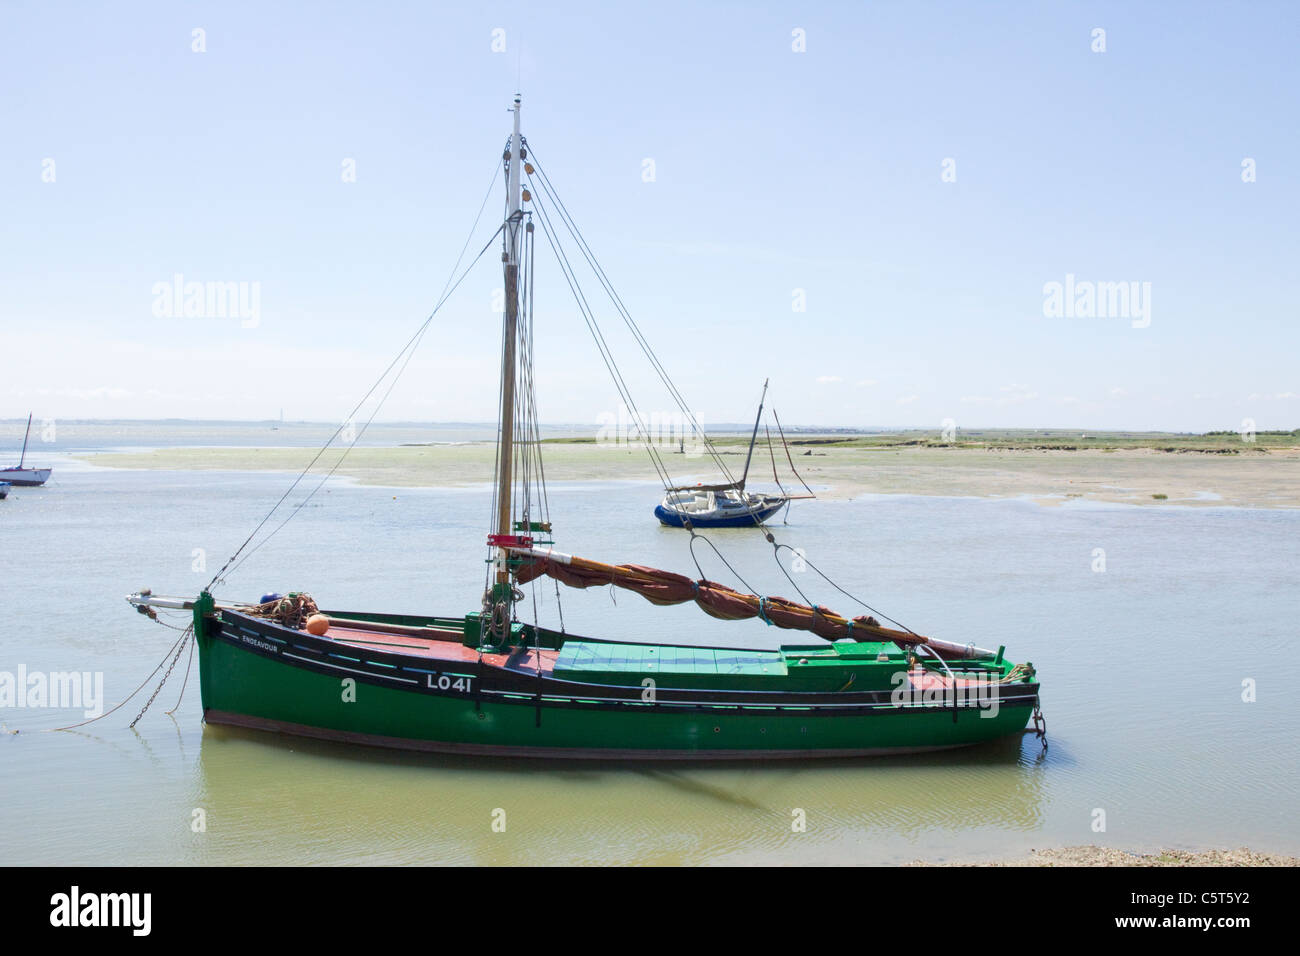 LO41 Endeavor at low tide Stock Photo